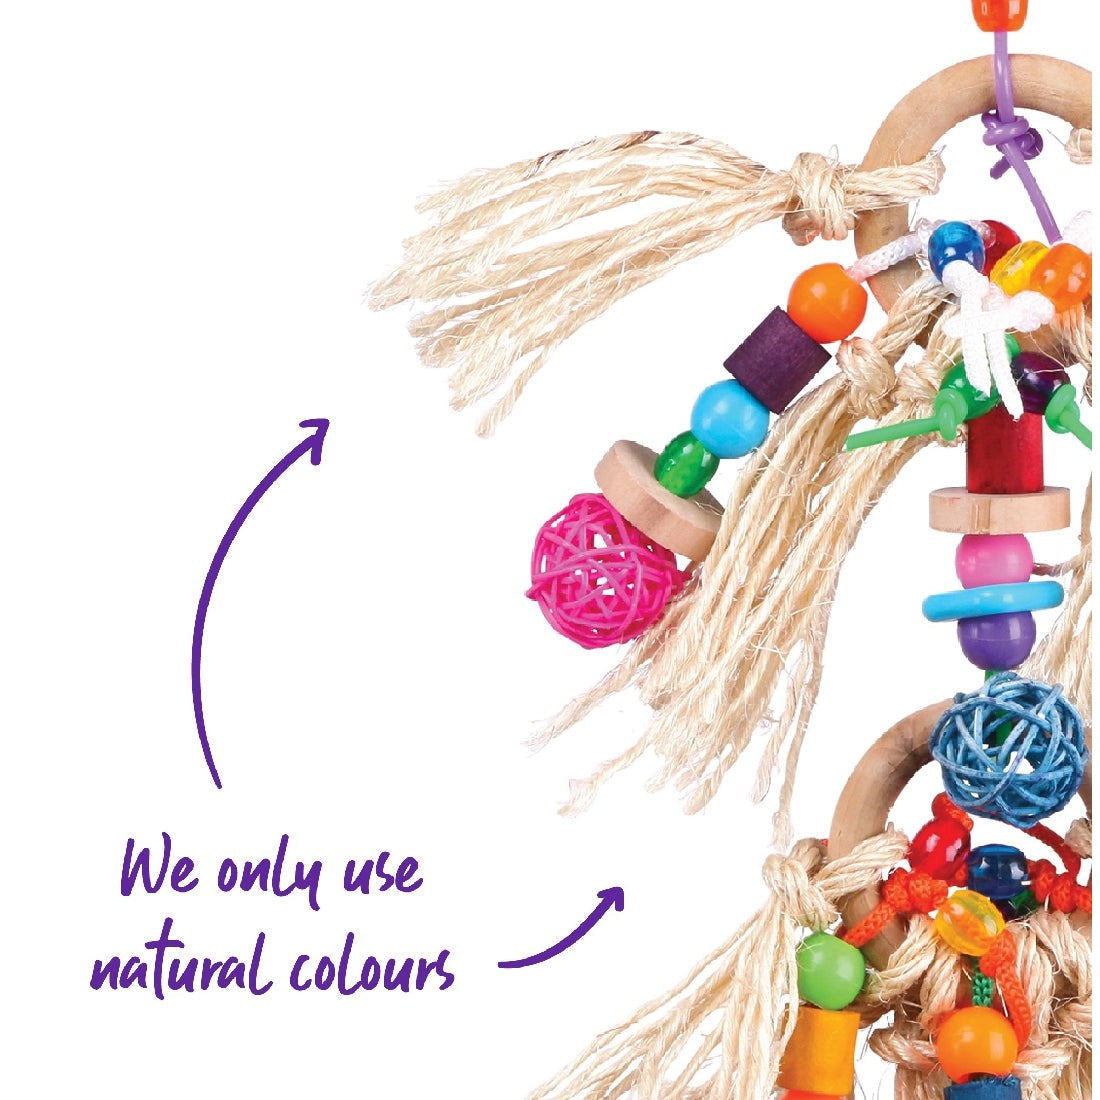 Colorful bird toy with natural fibers and wooden beads.